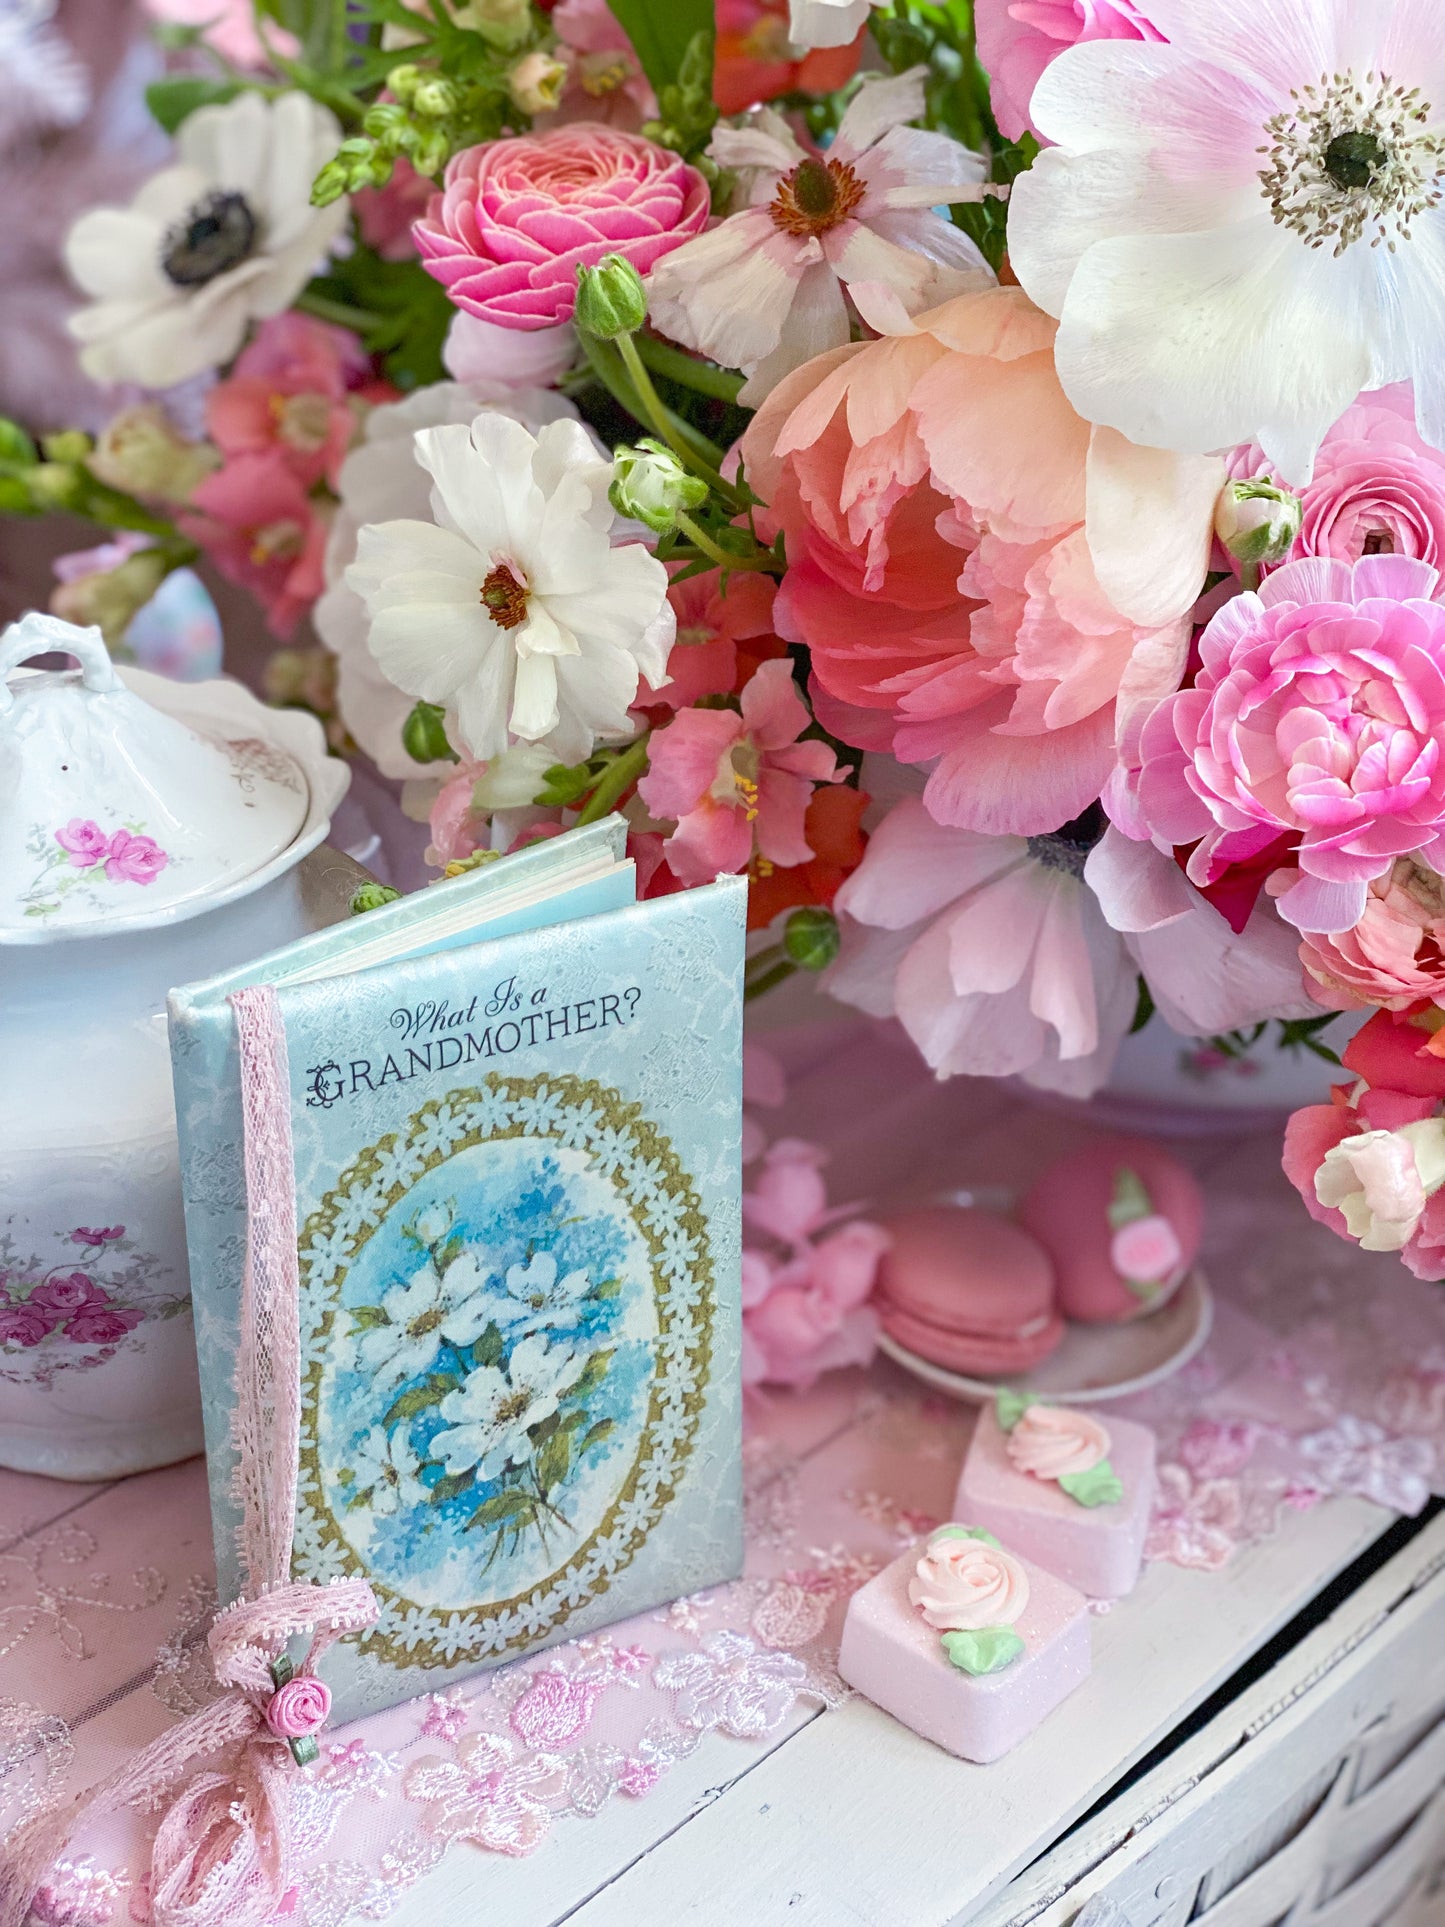 What is a Grandmother? Blue Floral Gift Book